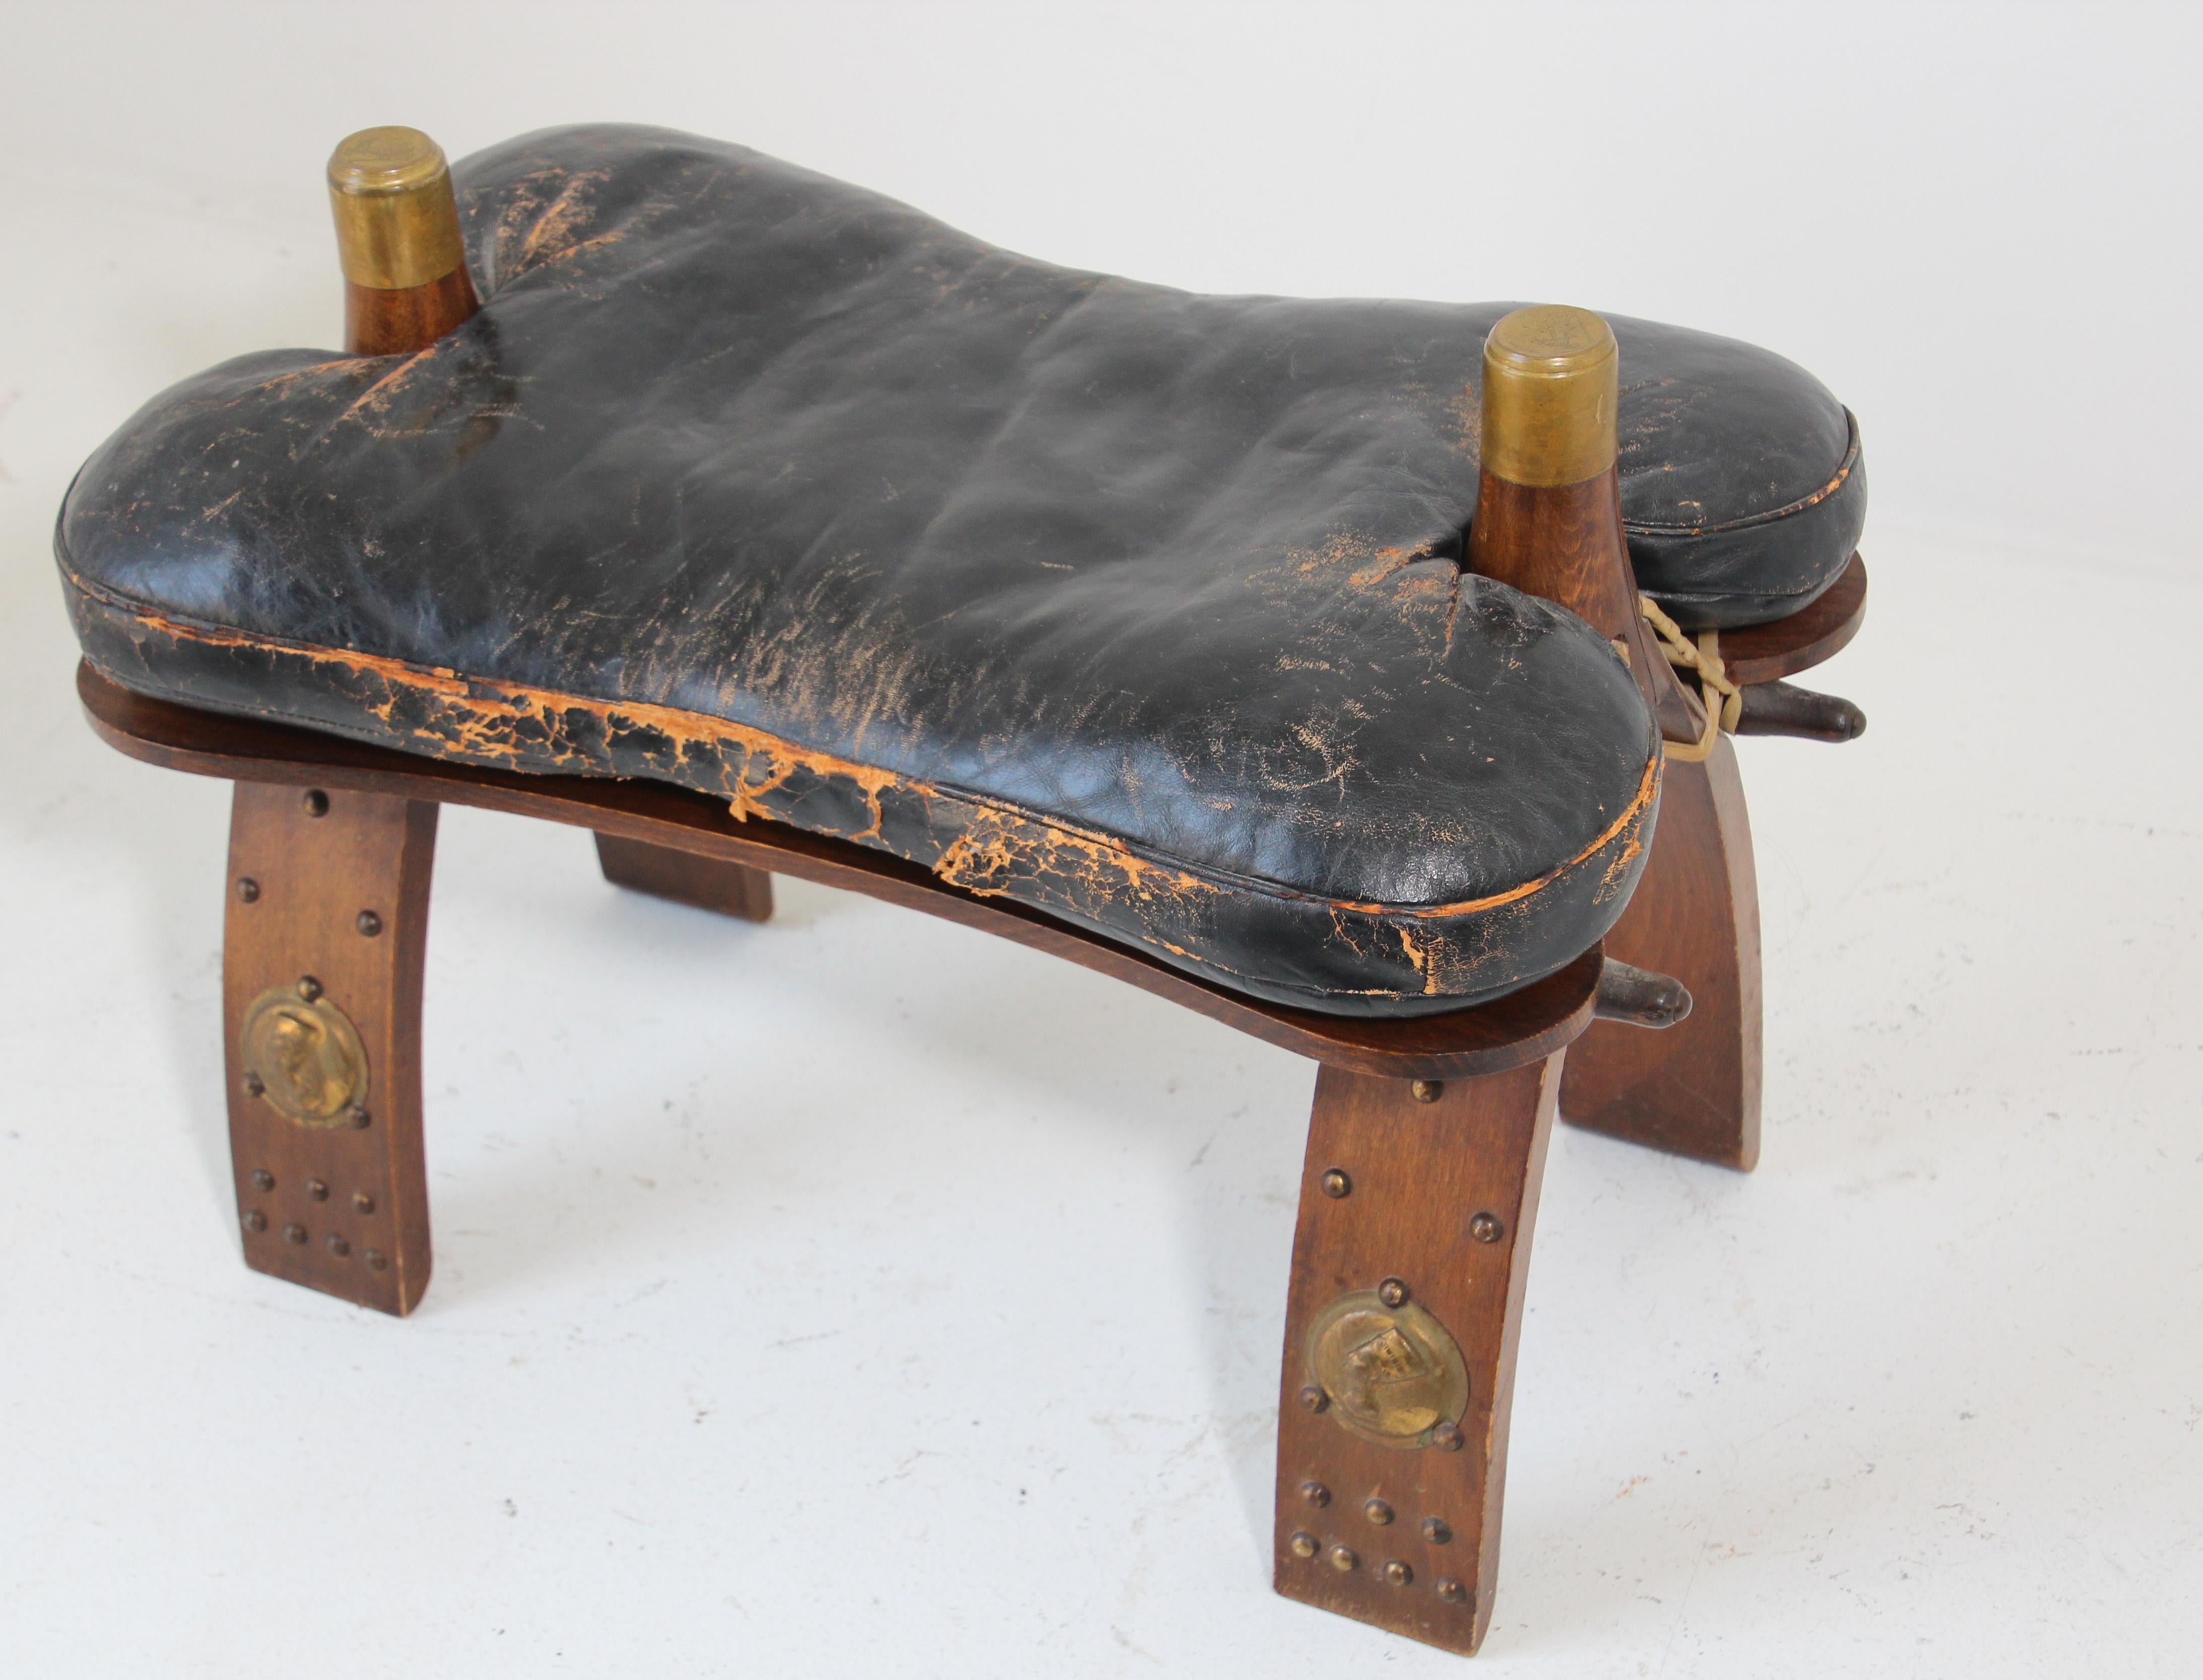 Vintage Egyptian, North Africa camel saddle shape stool.
Traditionally used to ride camels in the desert of Africa and the Middle East, this camel saddle could be used as a foot stool or just as an accent tribal piece in any room.
Wooden base is